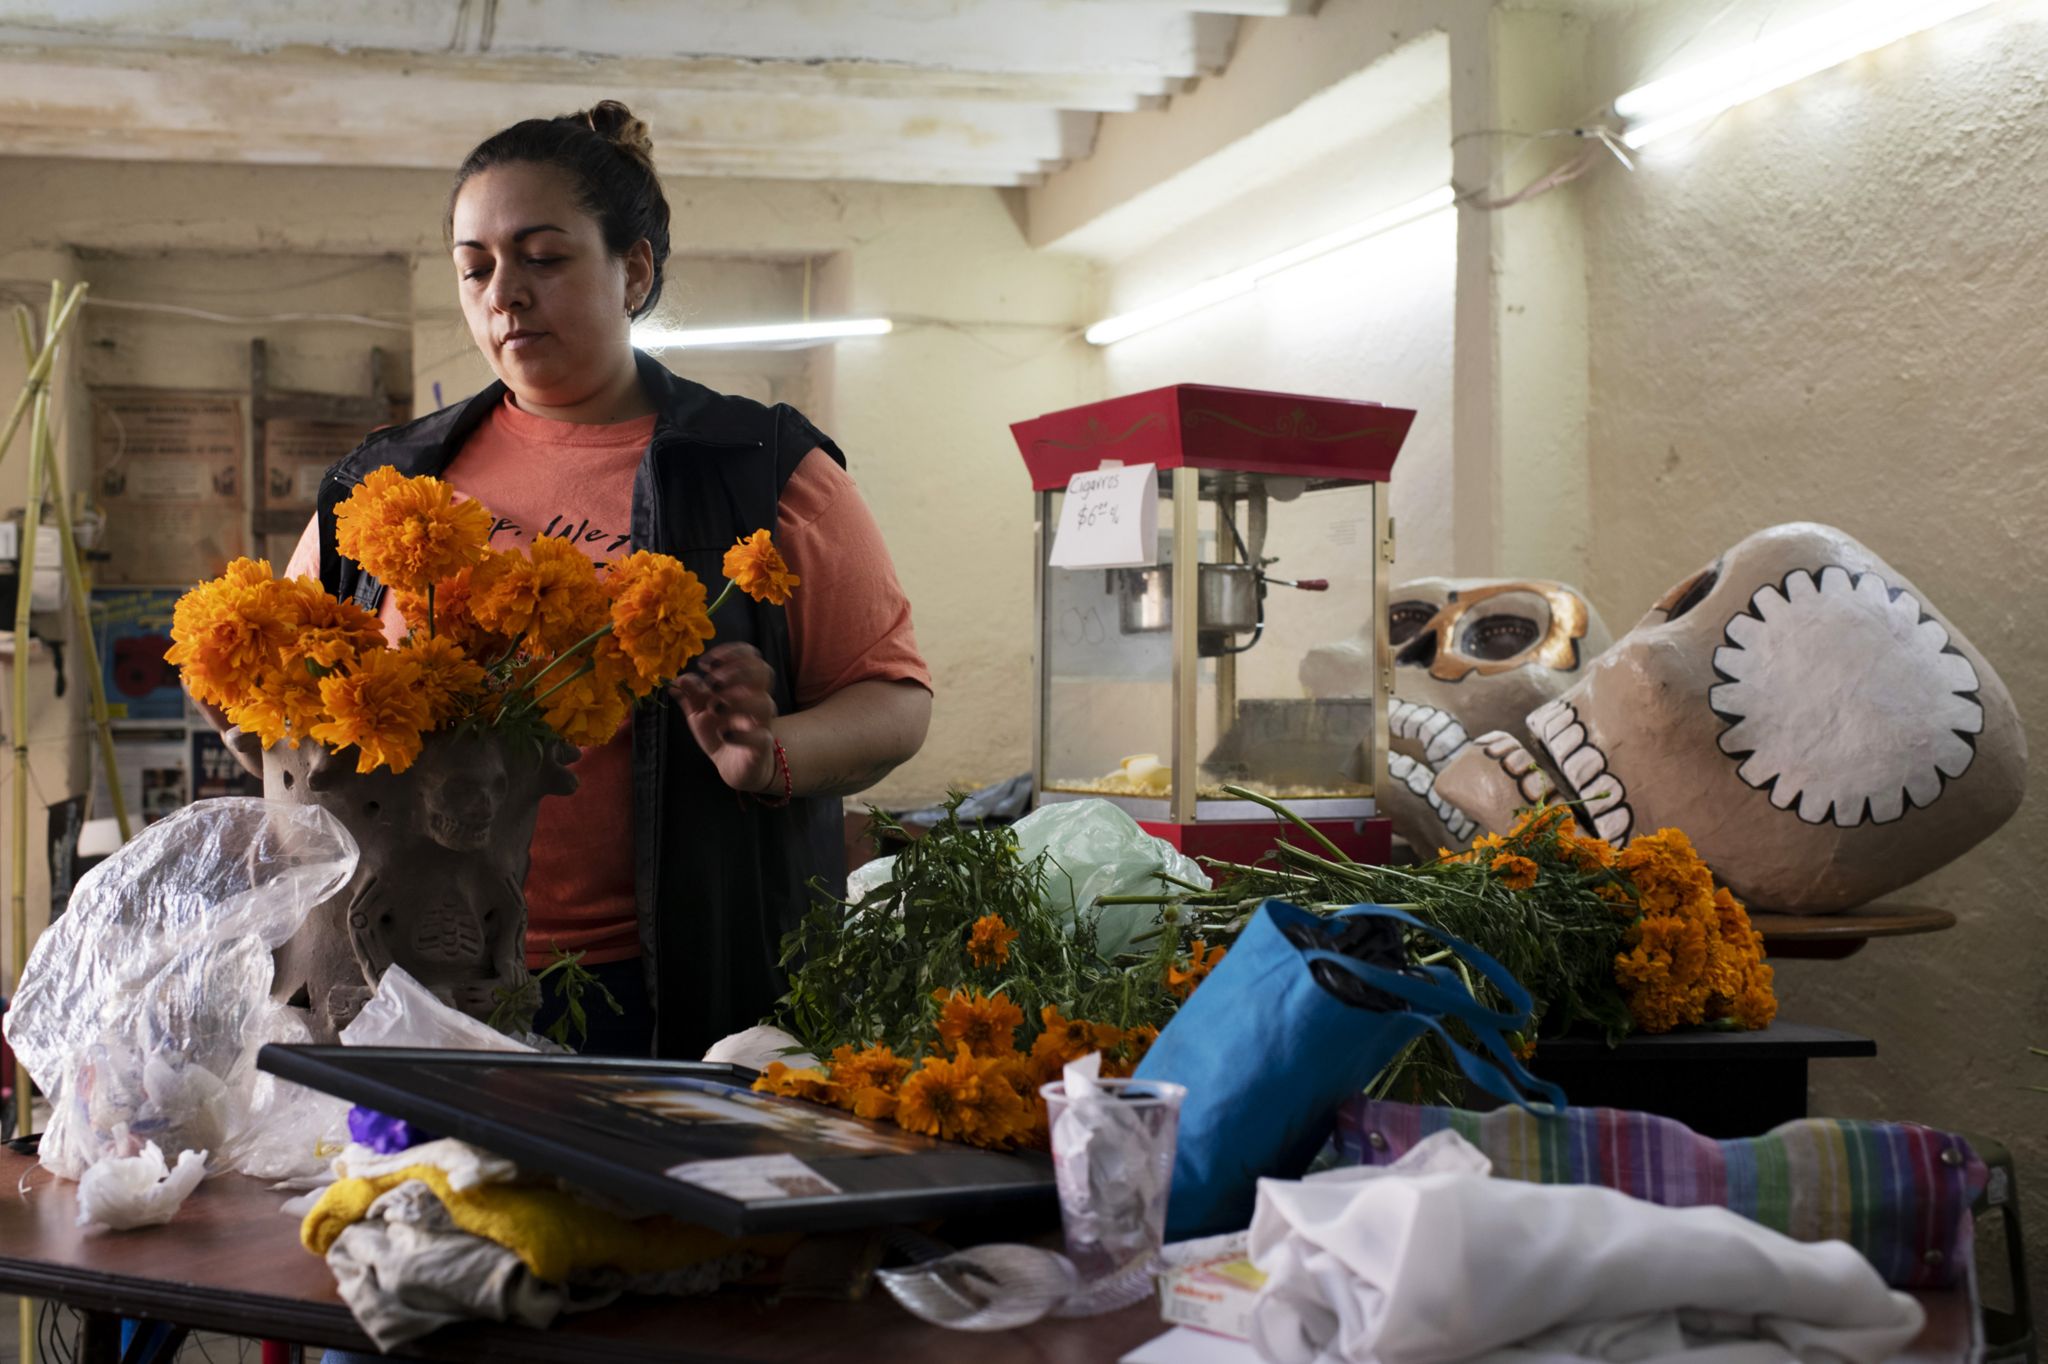 Malinali Garcia, who is part of the Tepito cultural space, is making preparations to put on the traditional offering for the Day of the Dead